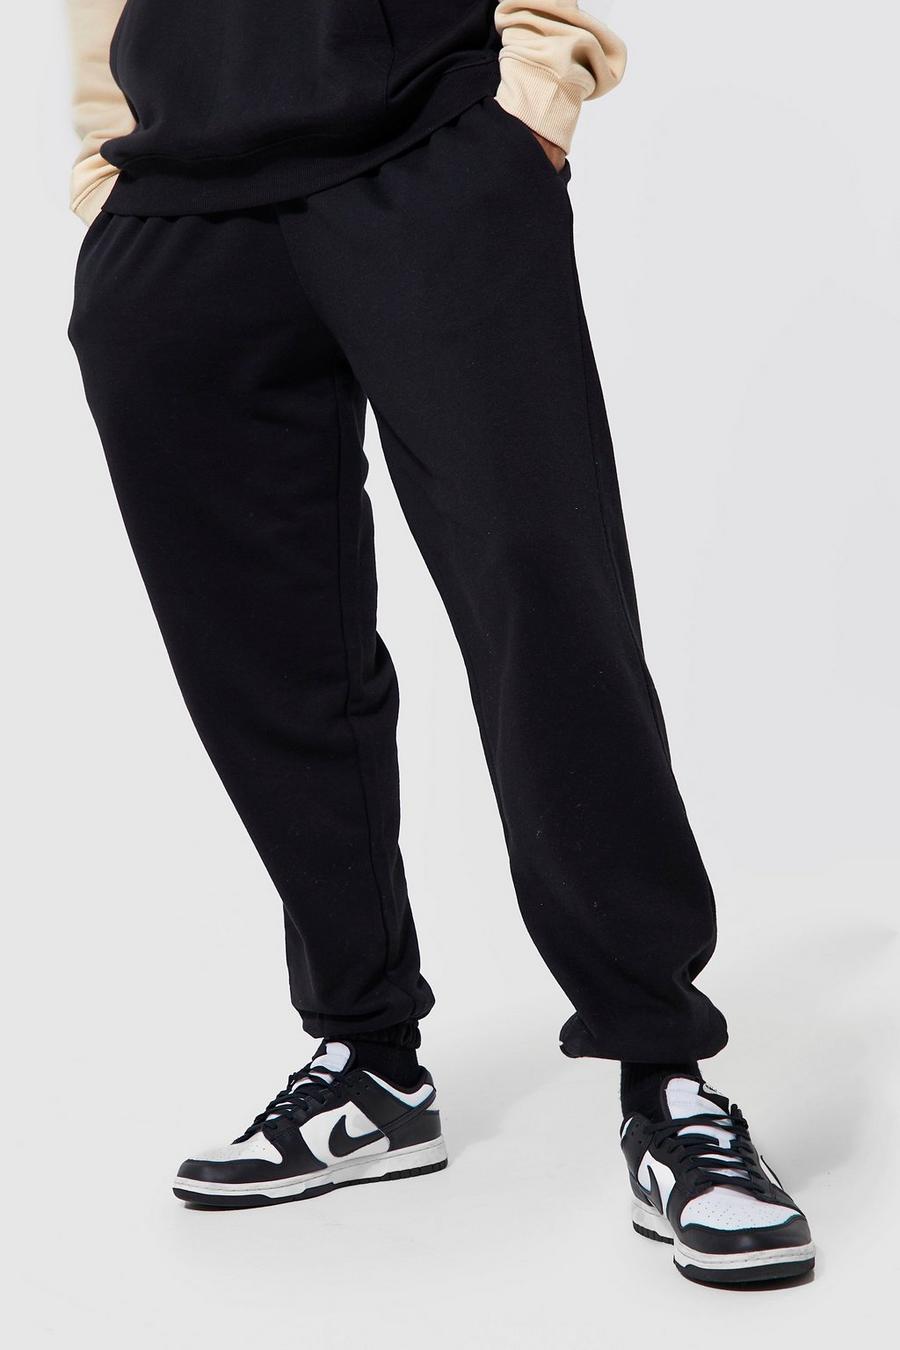 Black noir Tall Basic Loose Fit Jogger with REEL Cotton